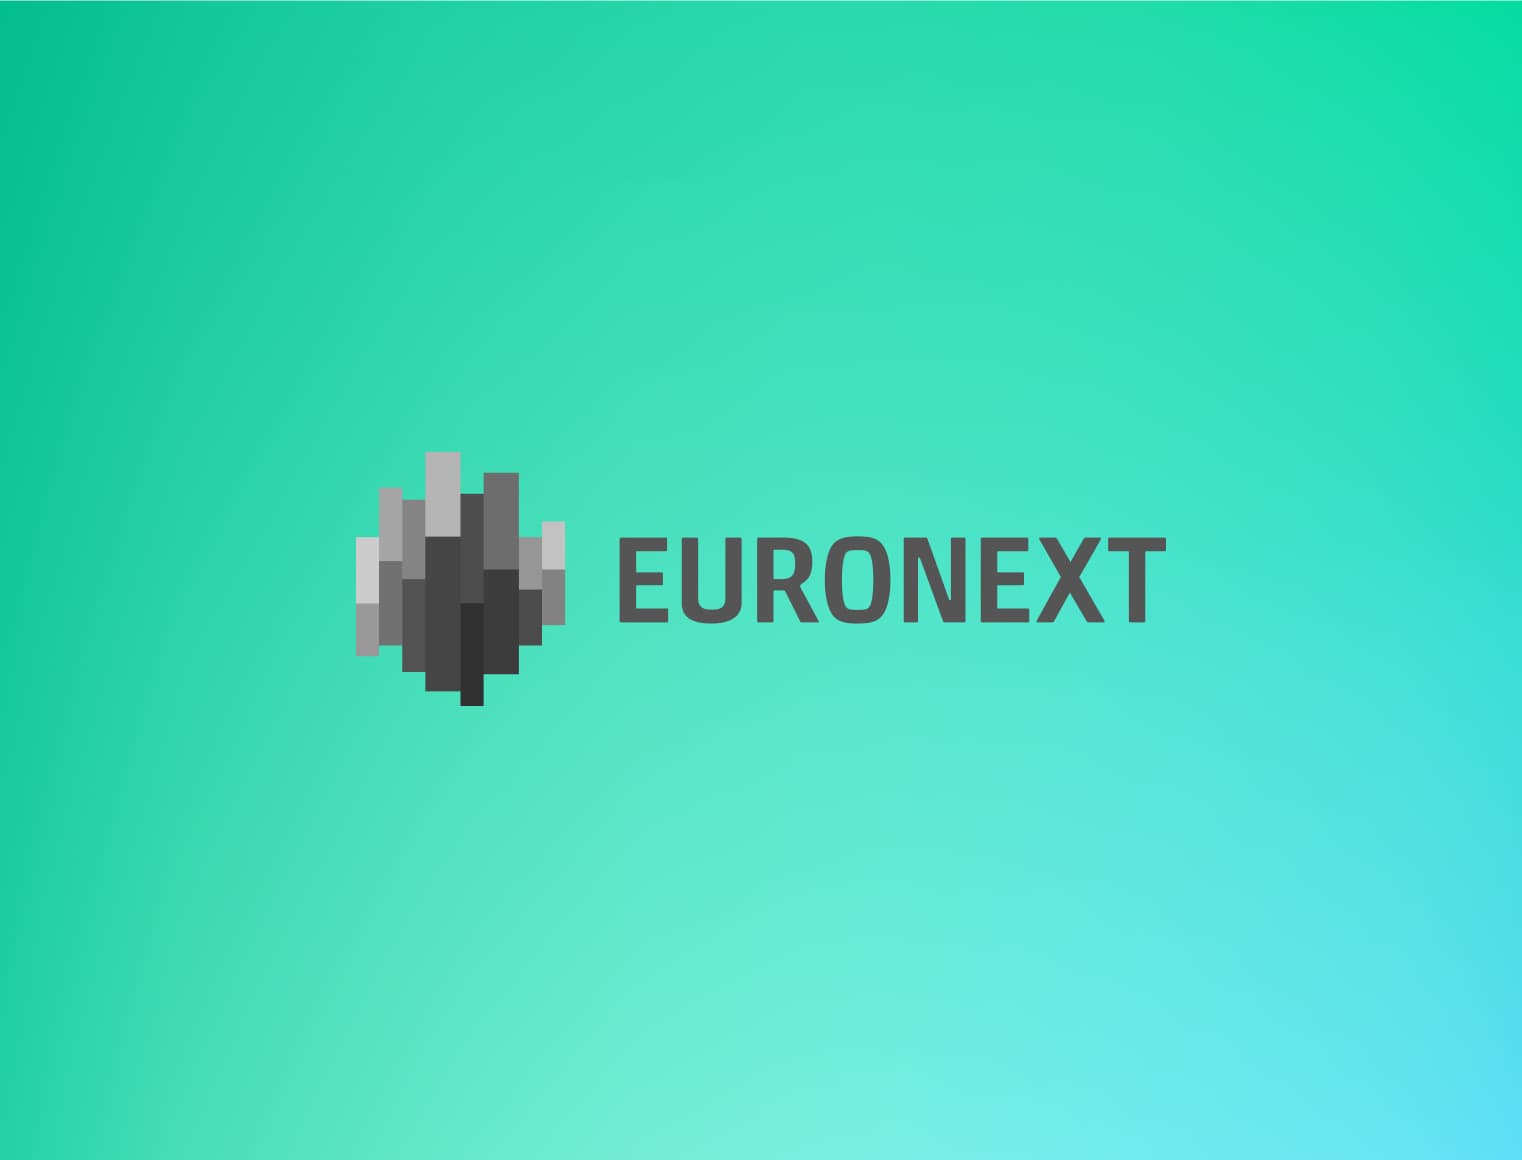 Listing on Euronext